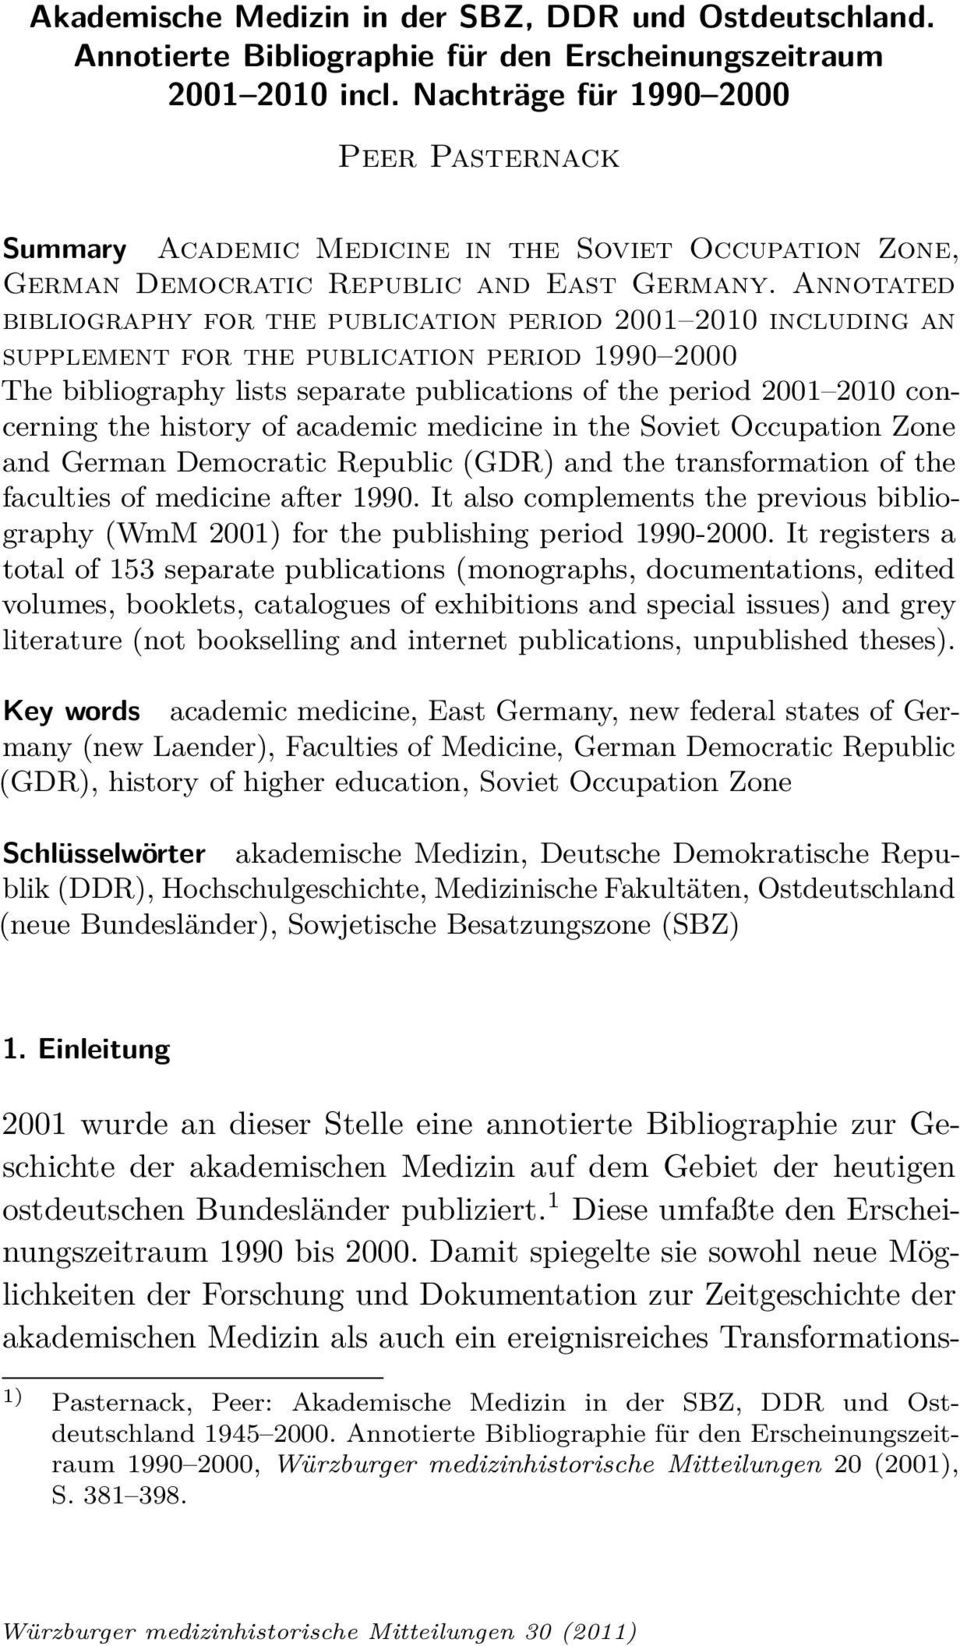 Annotated bibliography for the publication period 2001 2010 including an supplement for the publication period 1990 2000 The bibliography lists separate publications of the period 2001 2010